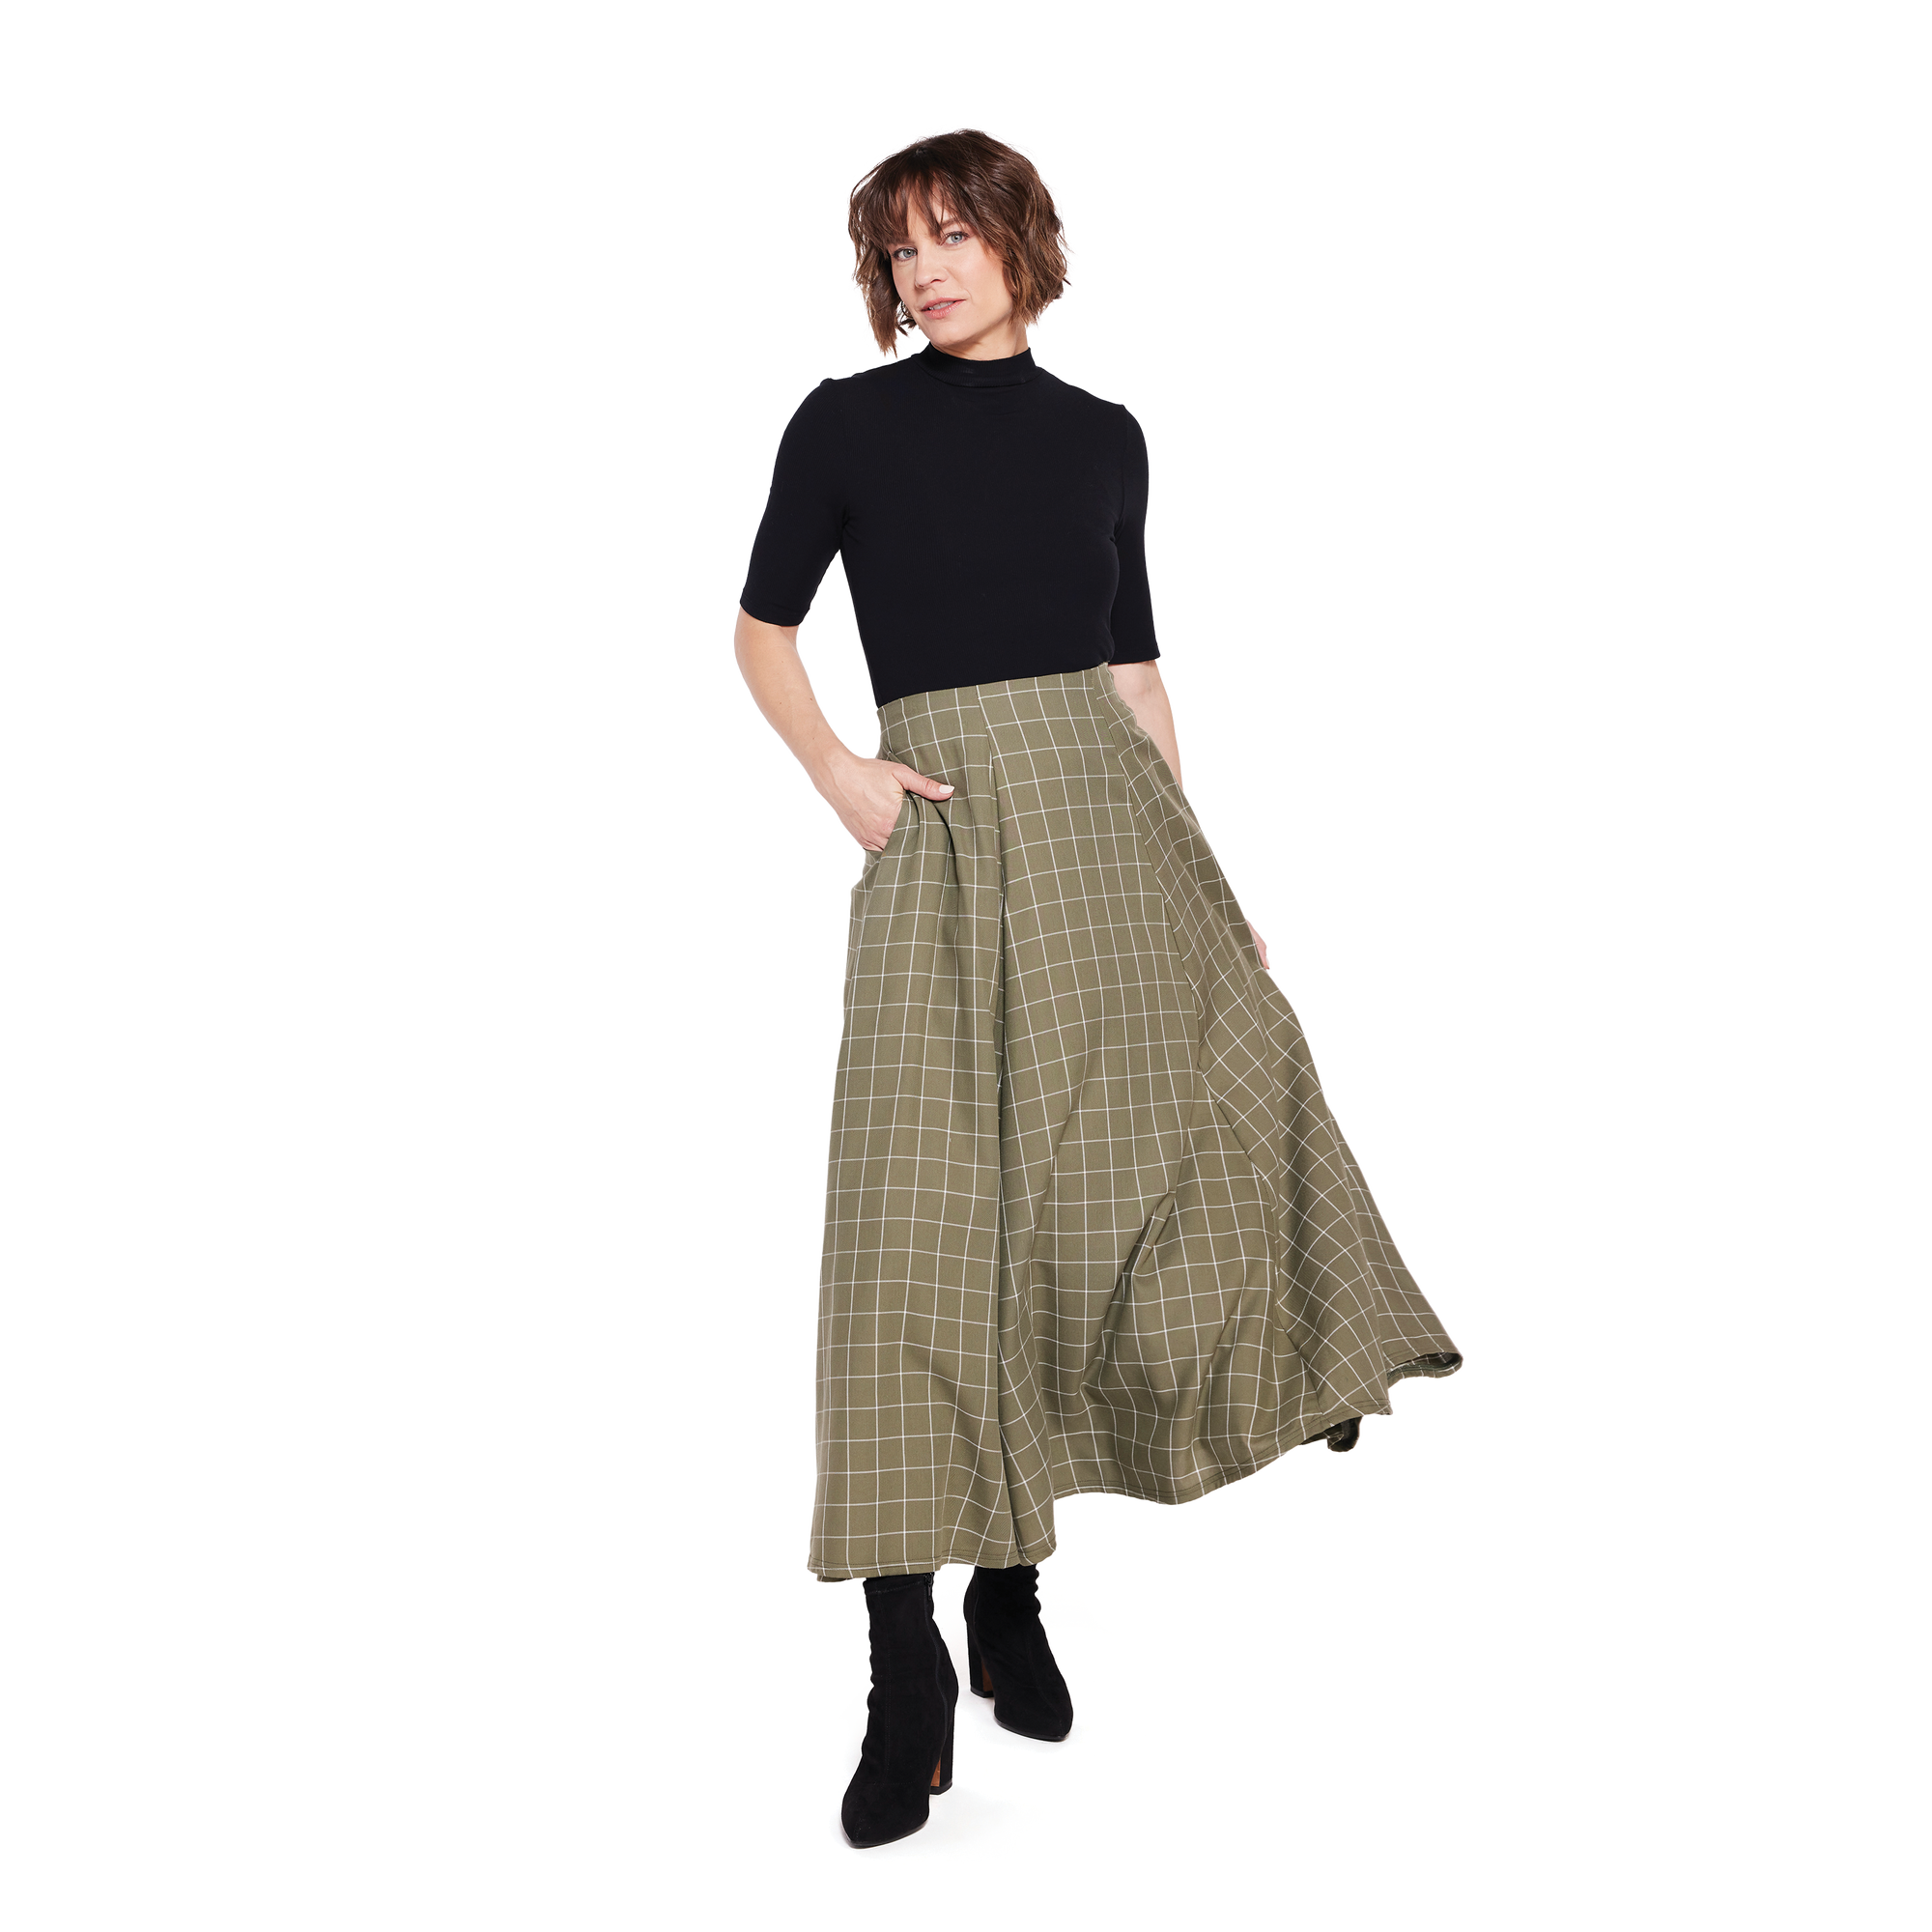 Fern Skirt Sewing Pattern | Ditto